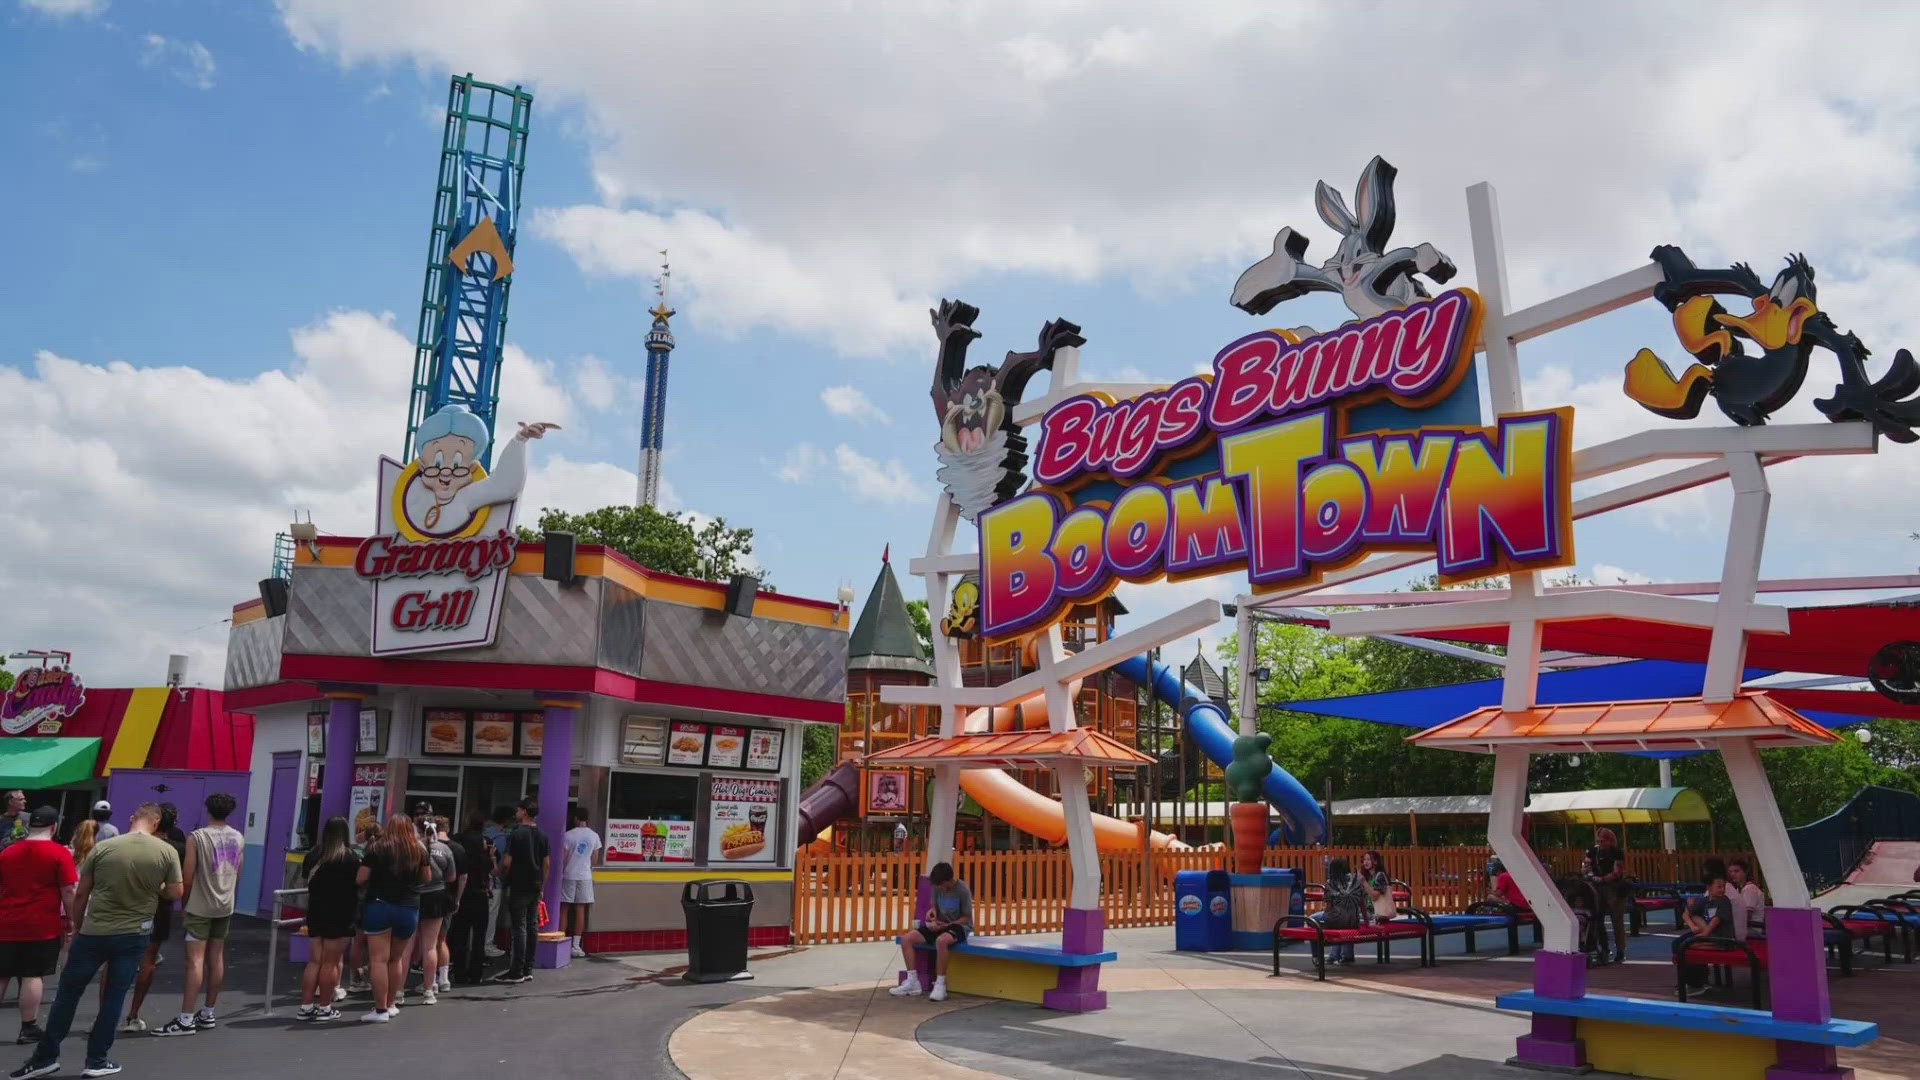 The two family-friendly rides are coming to Bugs Bunny Boomtown in Six Flags over Texas in Arlington.